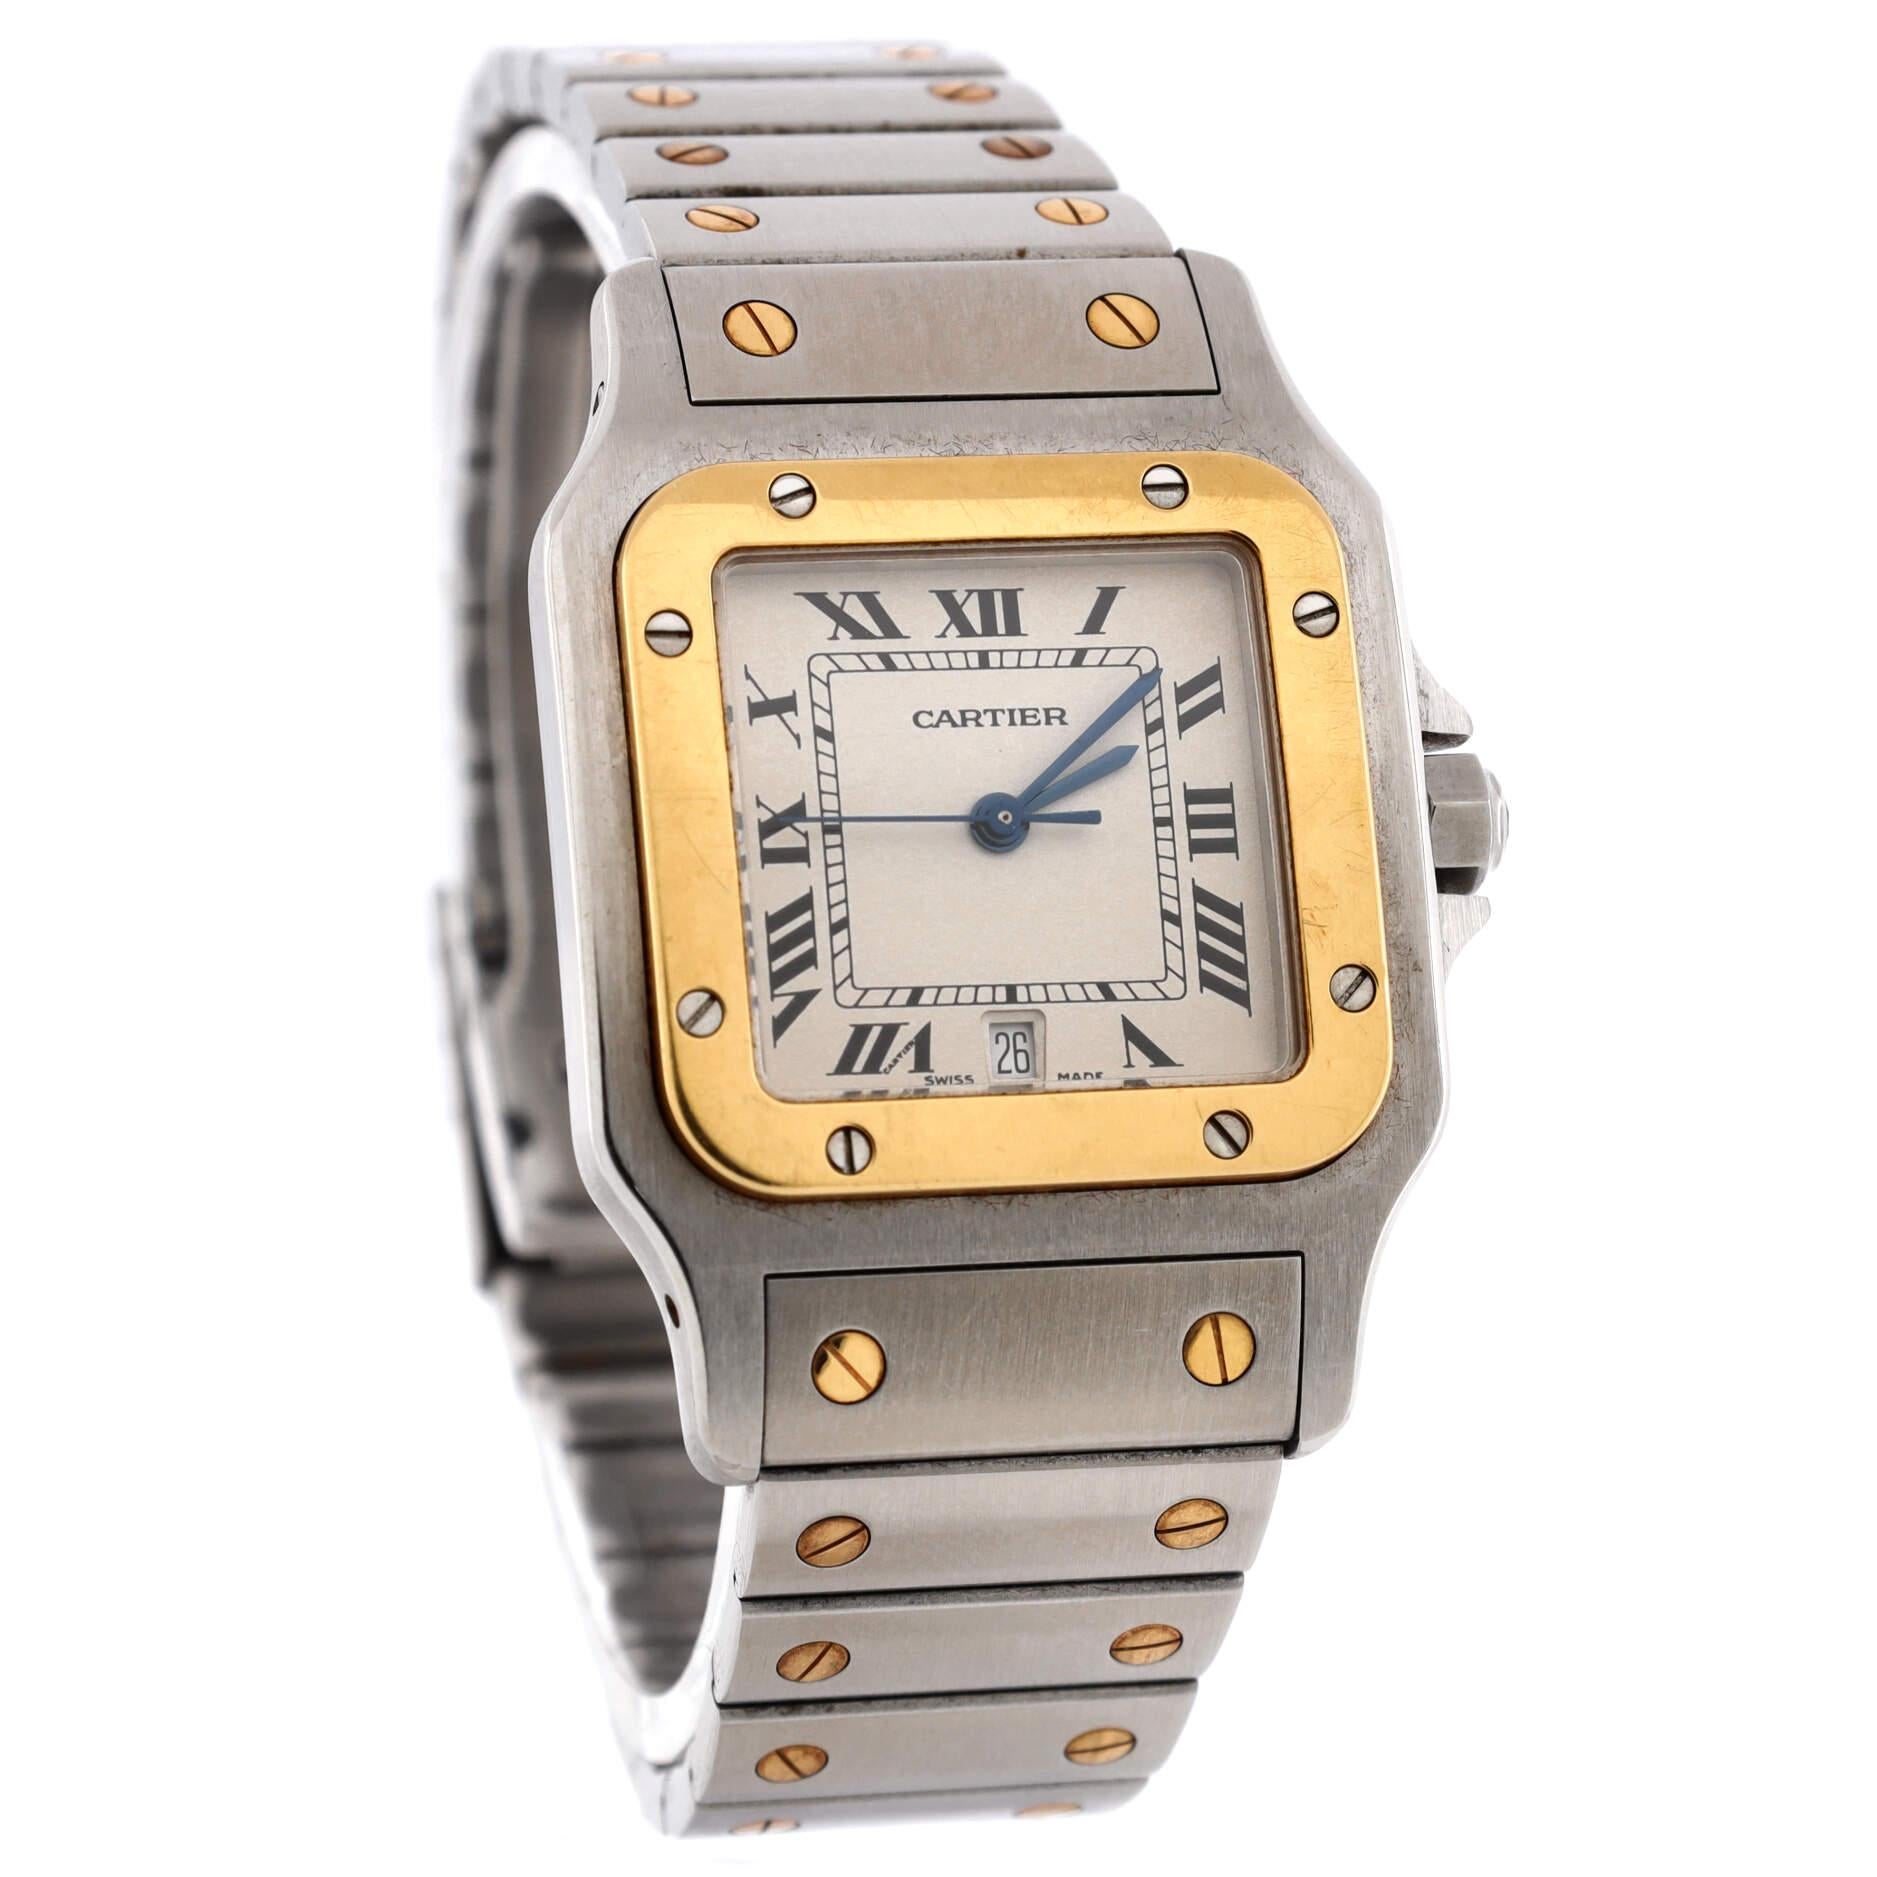 Condition: Good. Heavy scratches and wear throughout. Wear and scratches on case and bracelet.
Accessories: No Accessories
Measurements: Case Size/Width: 29mm, Watch Height: 7mm, Band Width: 18mm, Wrist circumference: 6.25